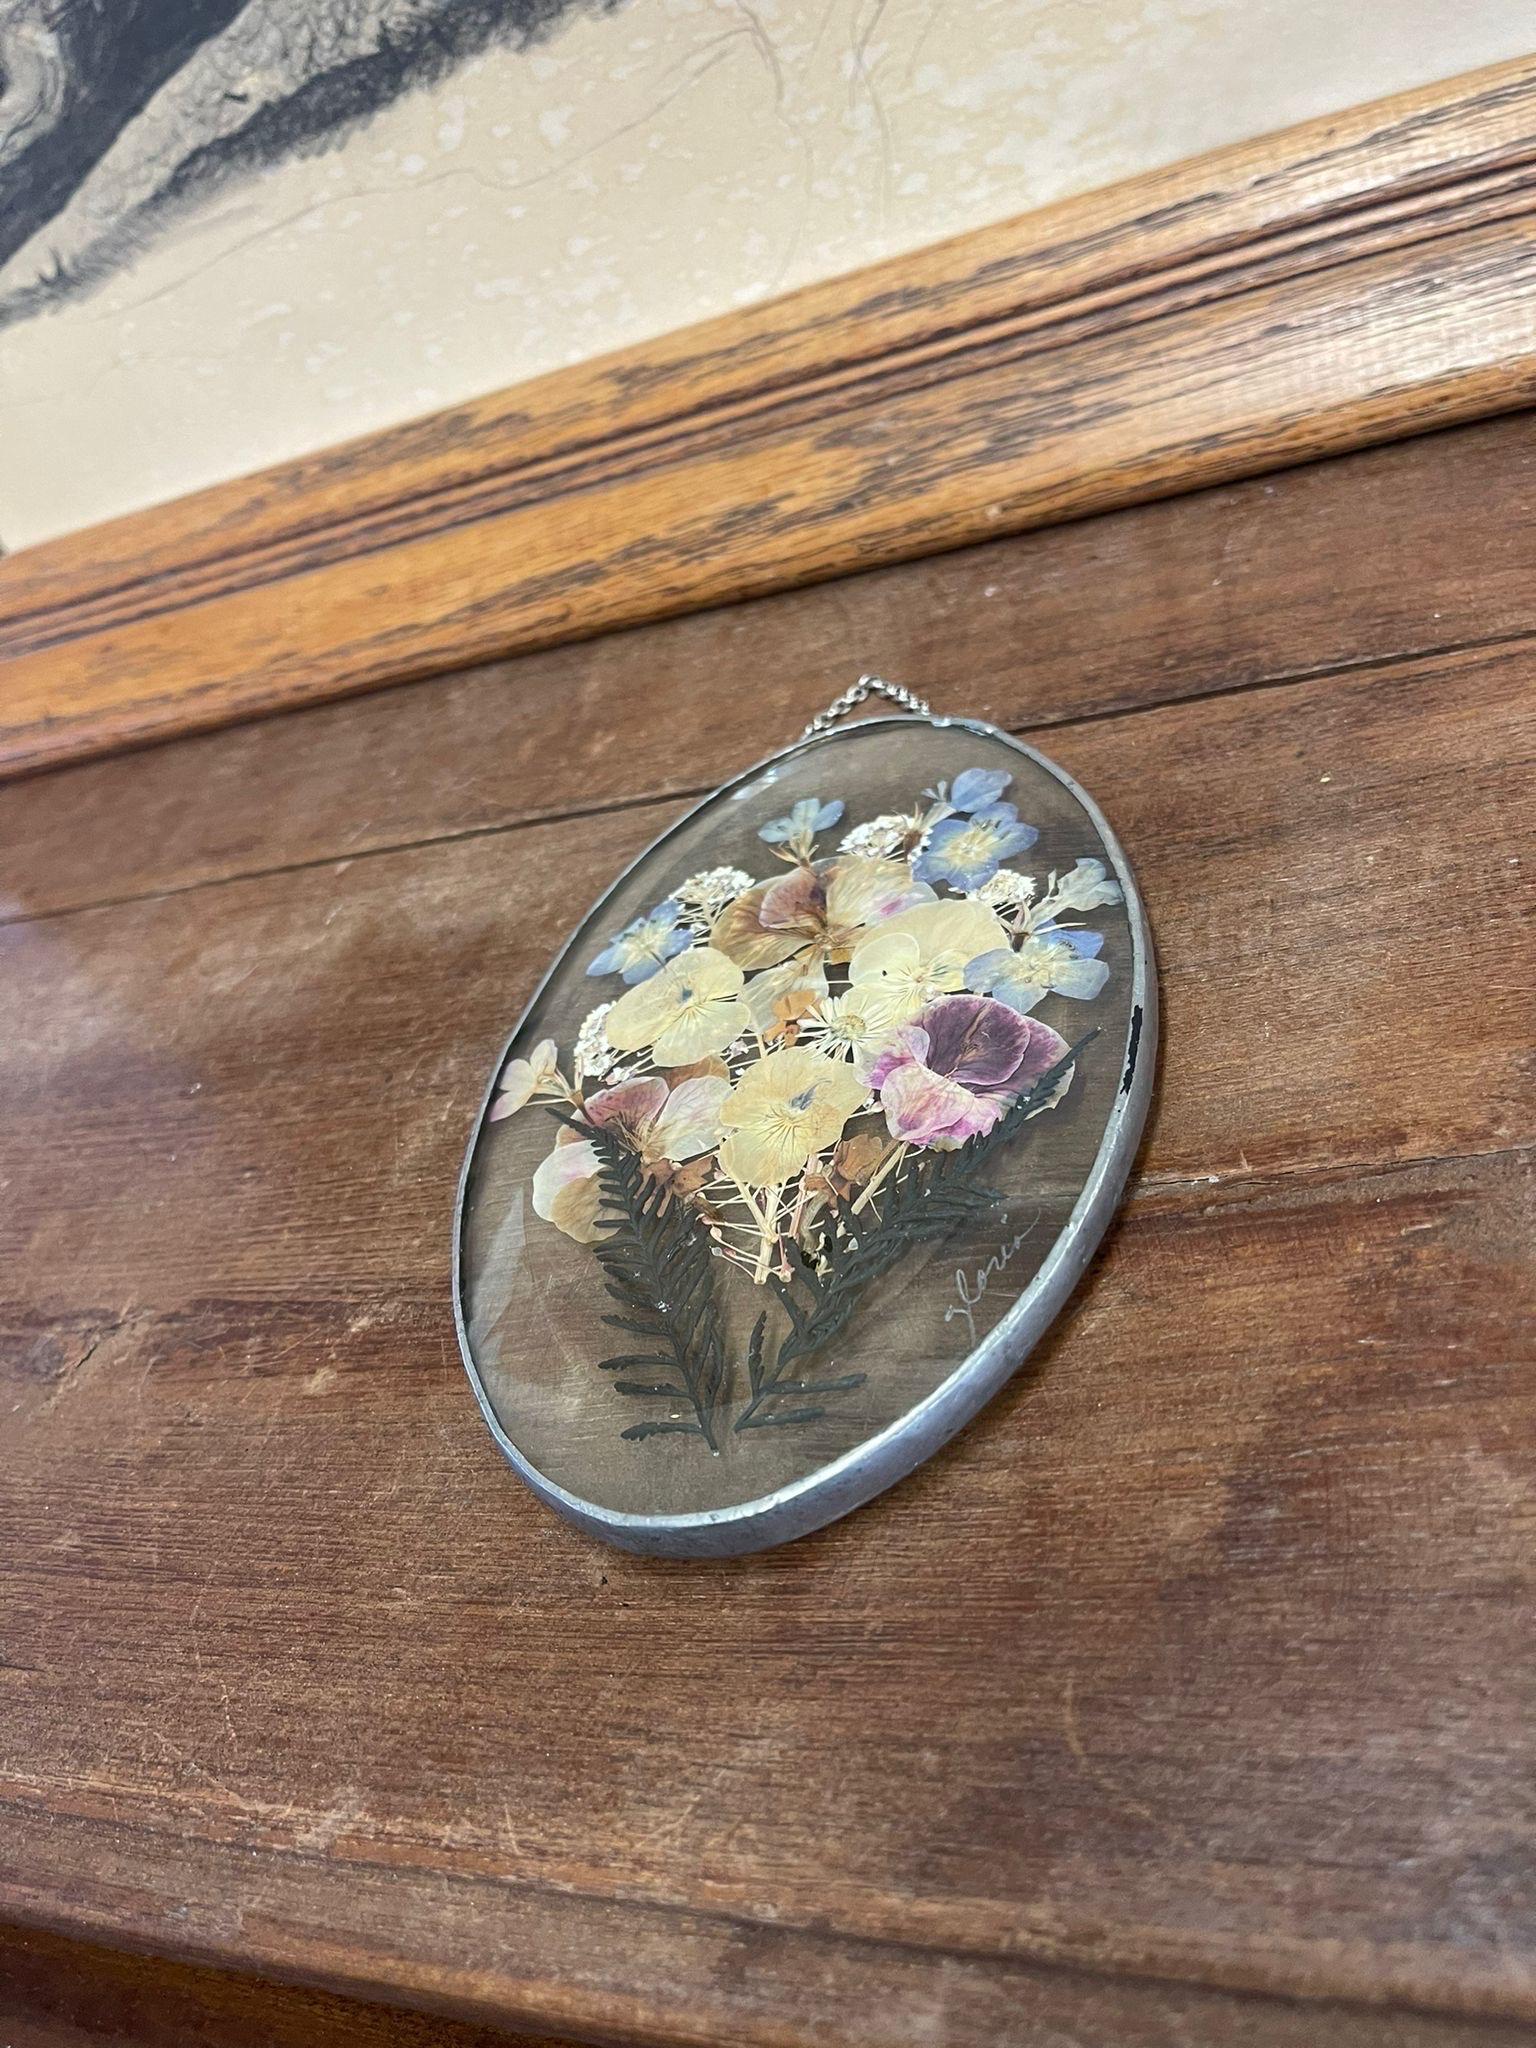 The glass frame is beveled with the Artist signature etched into the lower corner. The main flower used are pansies, with a variety of other flowers. Vintage Condition Consistent with Age as Pictured.

Dimensions. 4 W ; 1/2 D ; 6 H